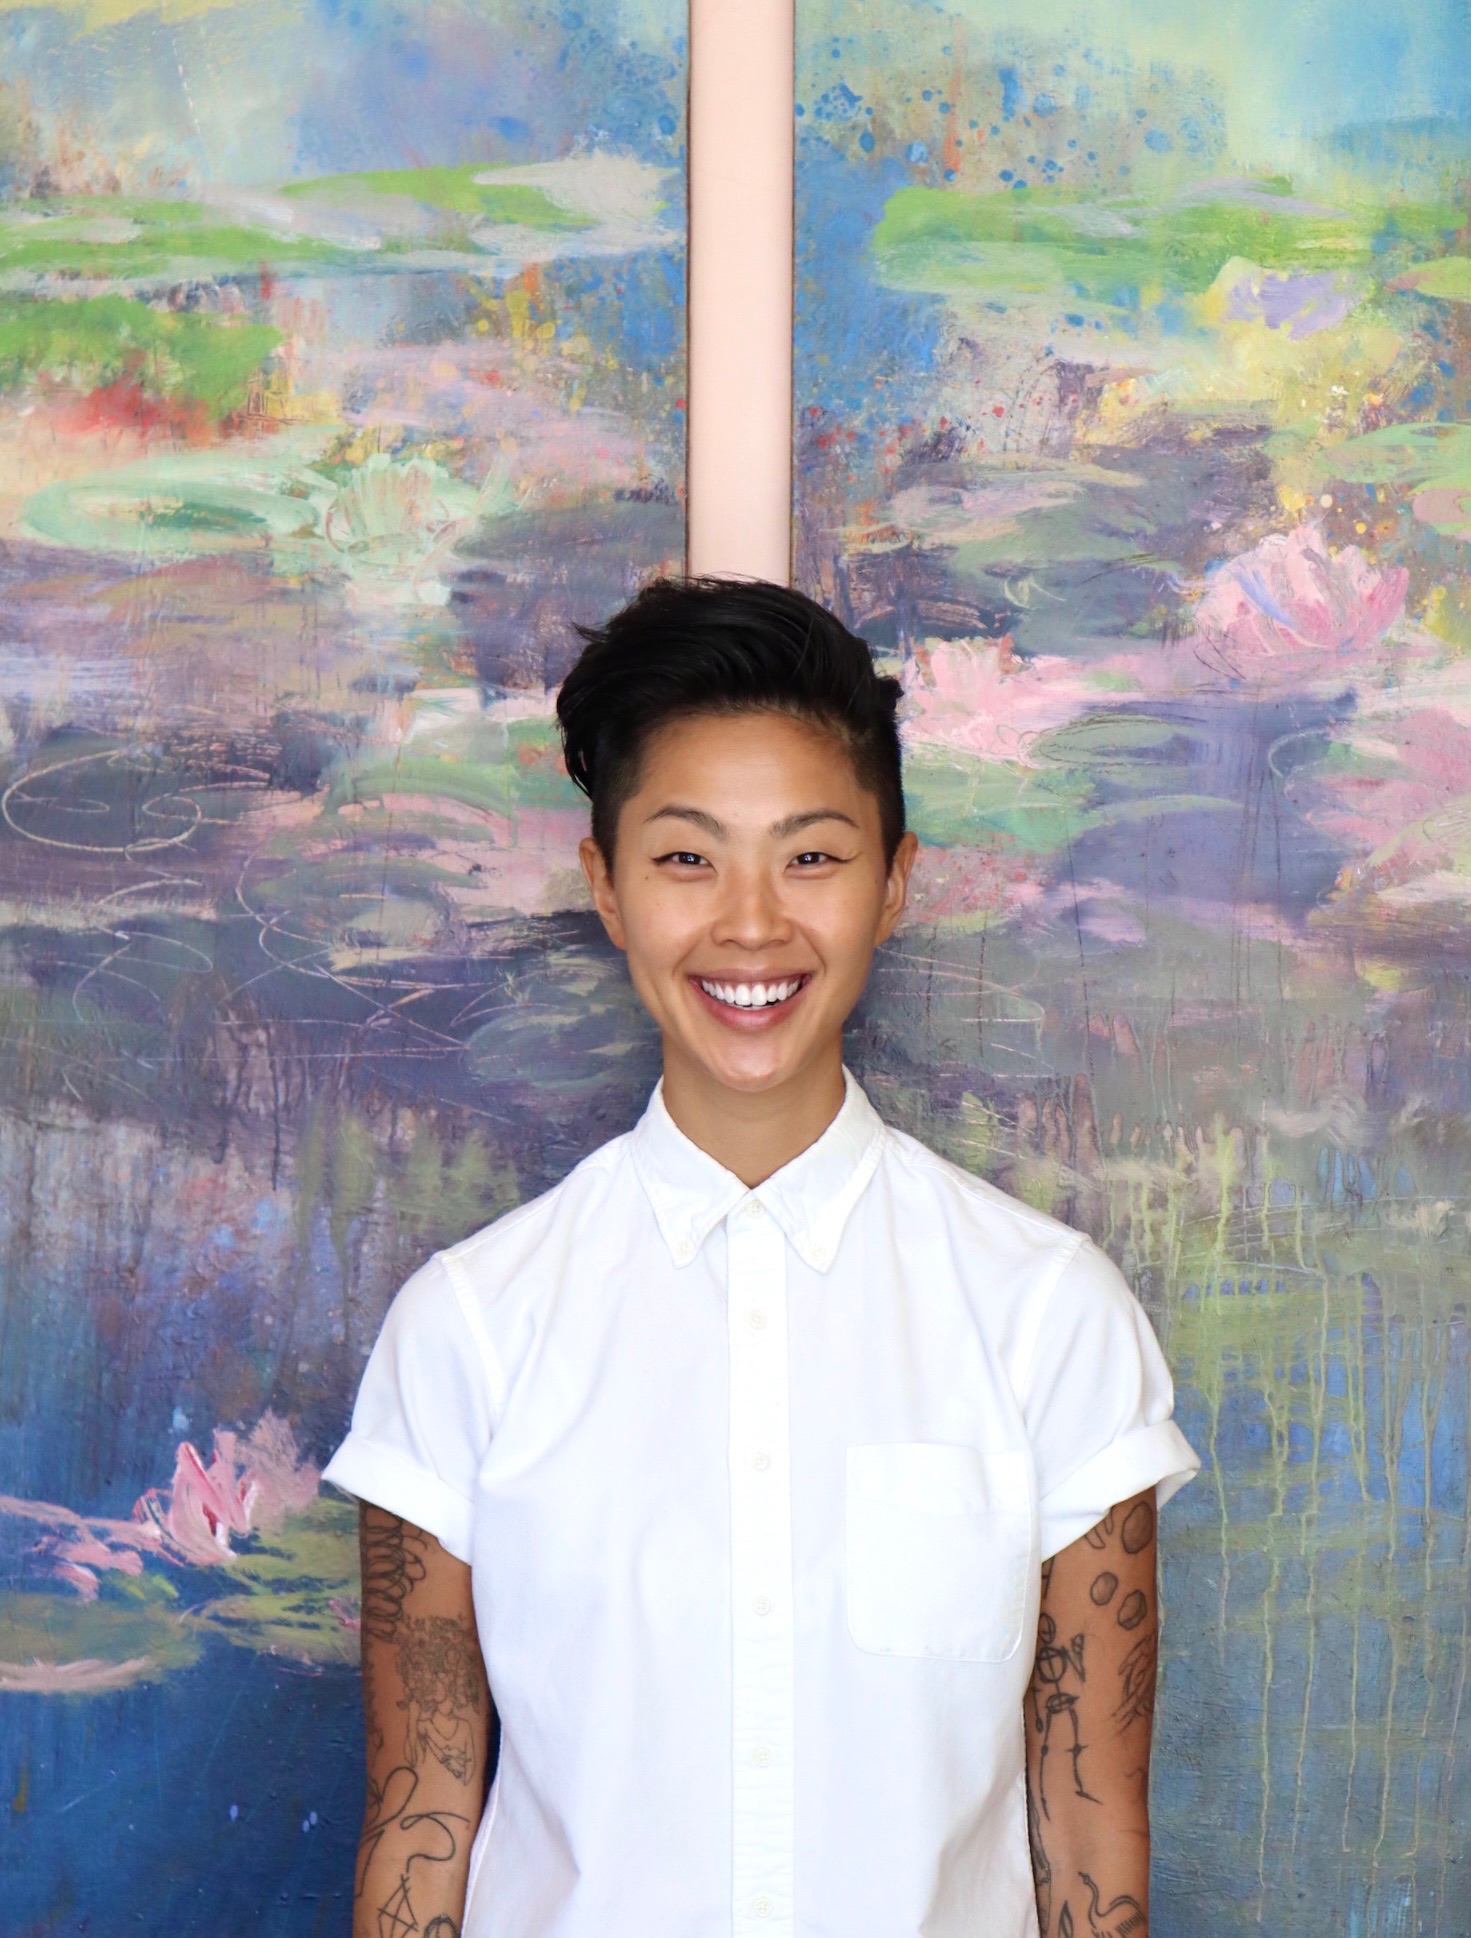 a headshot of celebrity chef and new Top Chef host Kristen Kish standing in front of a pastel colored painting